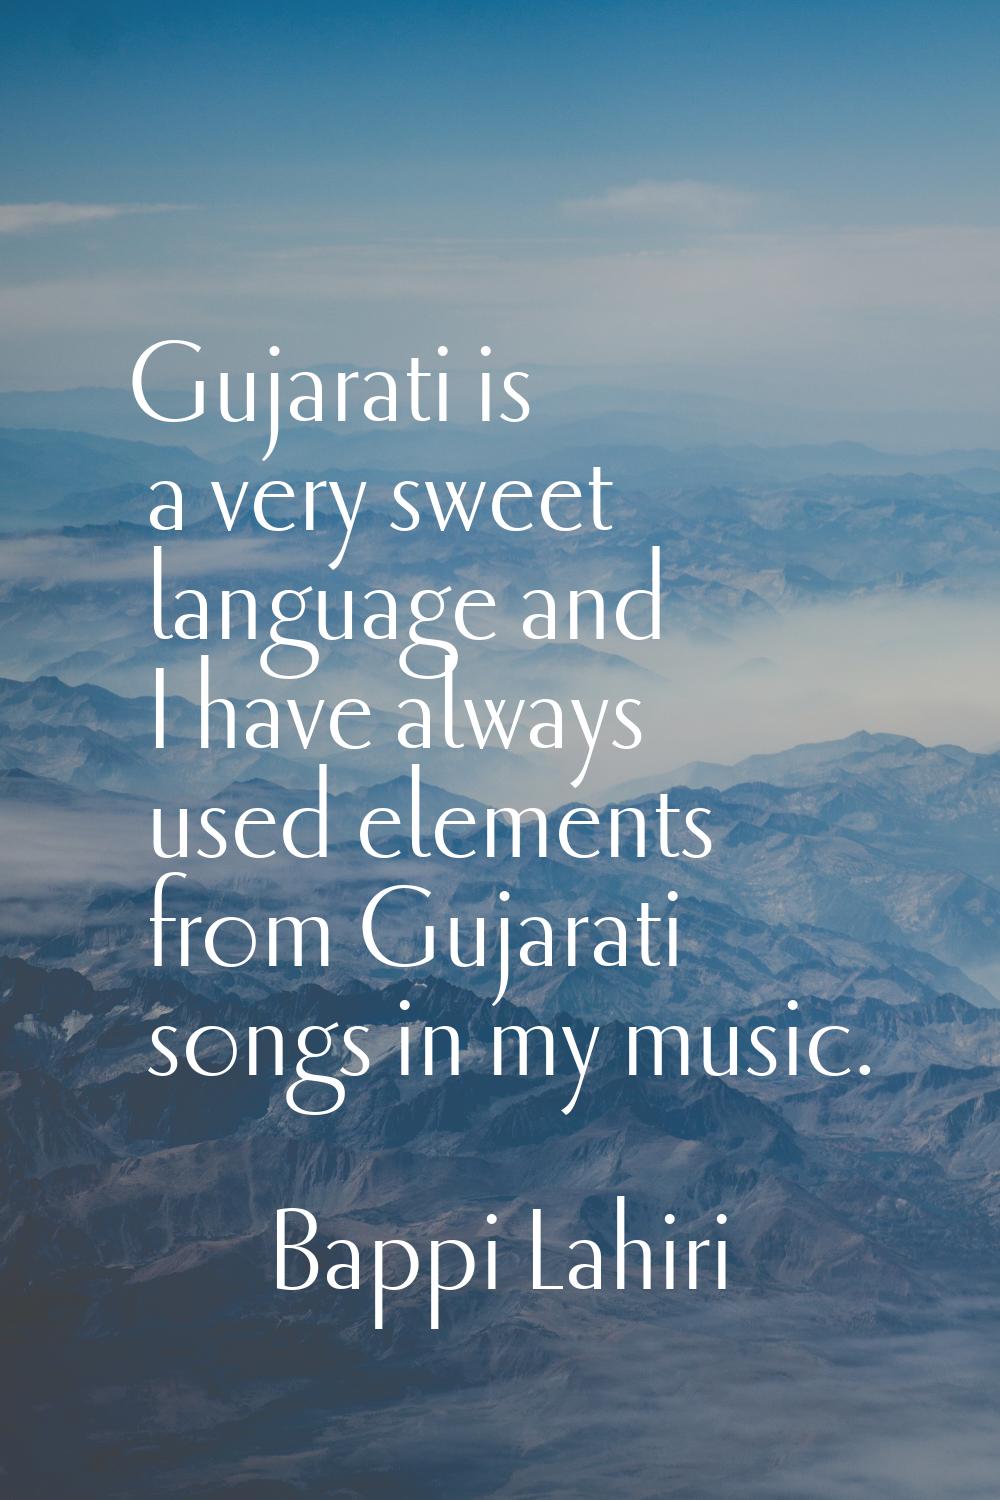 Gujarati is a very sweet language and I have always used elements from Gujarati songs in my music.